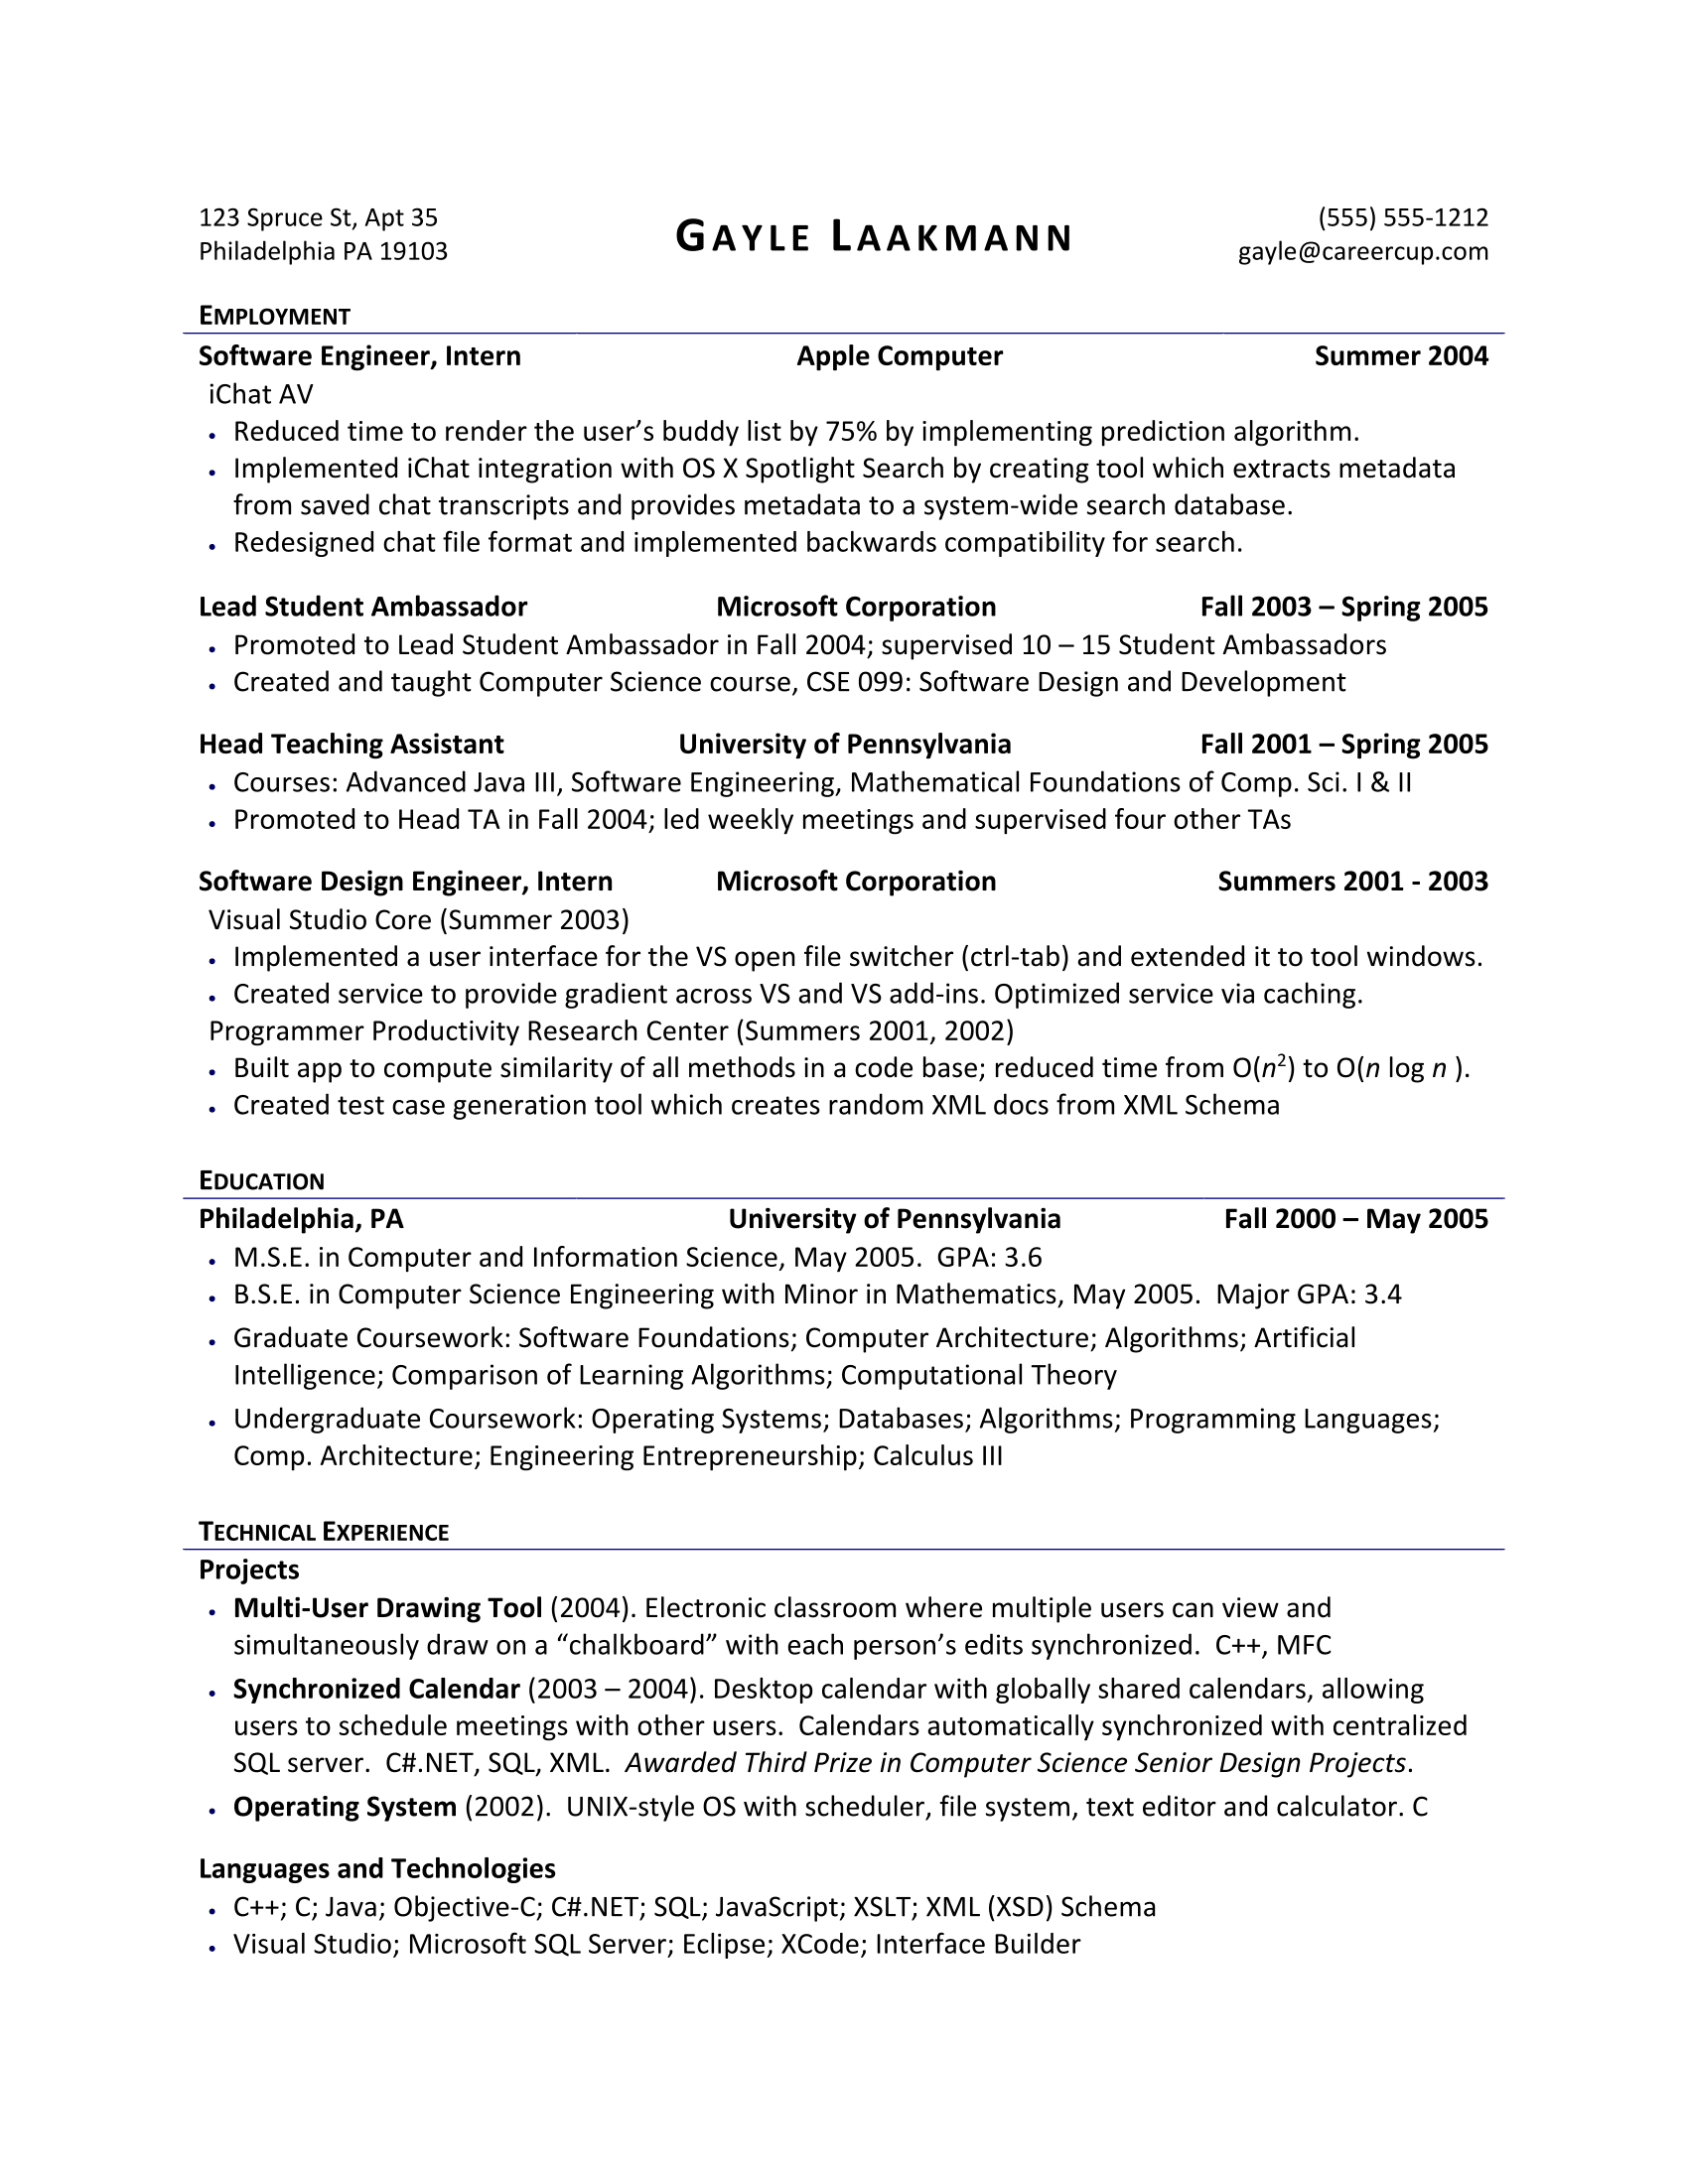 Professional Text Resume